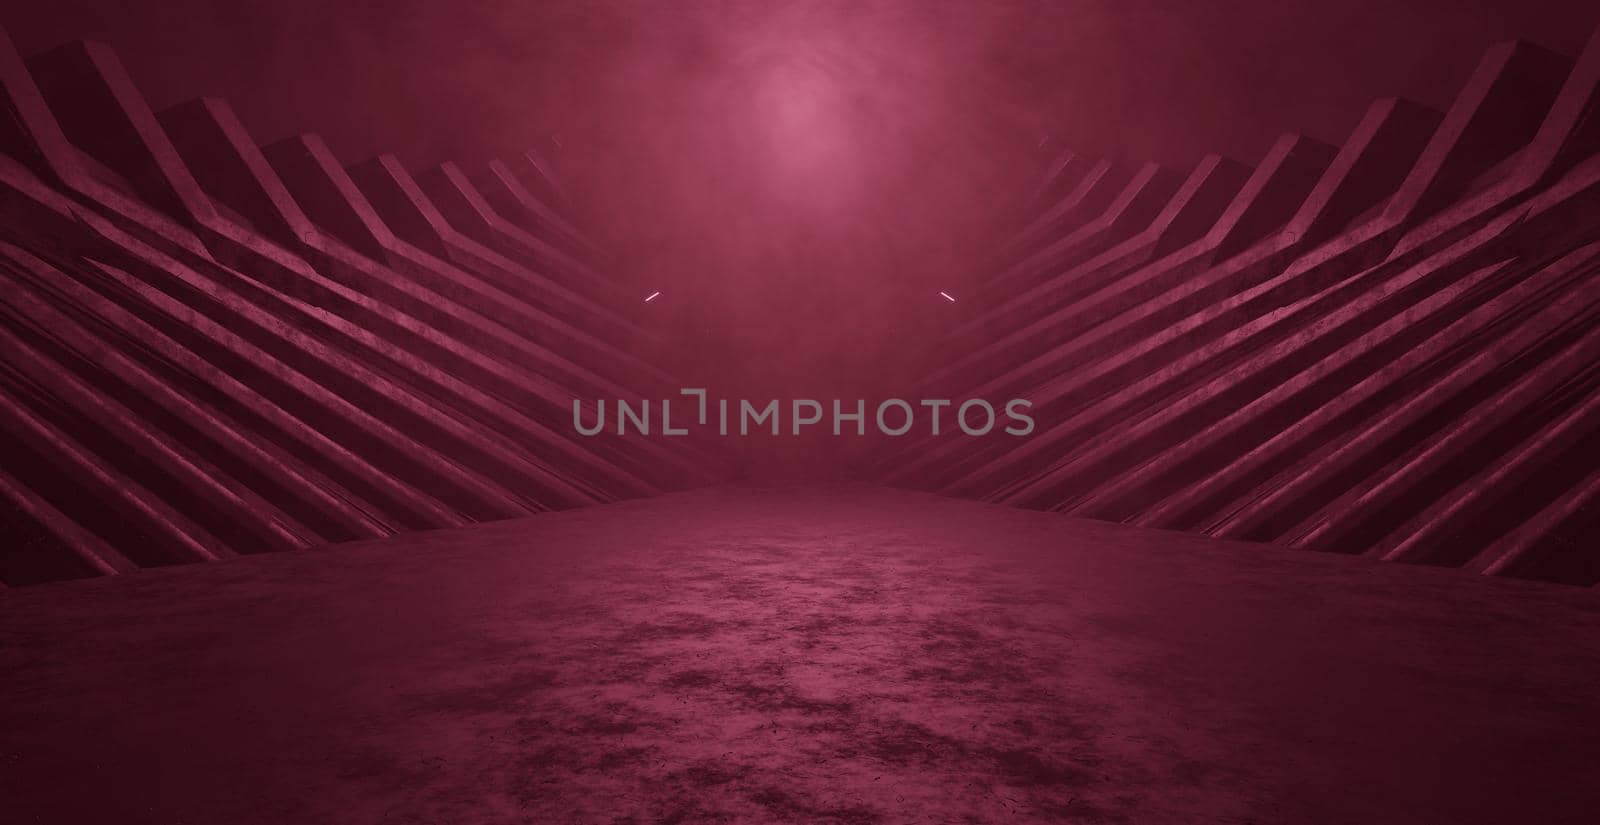 Abstract Empty Interesting Smoke Maroon Brown Hall Background 3D Render